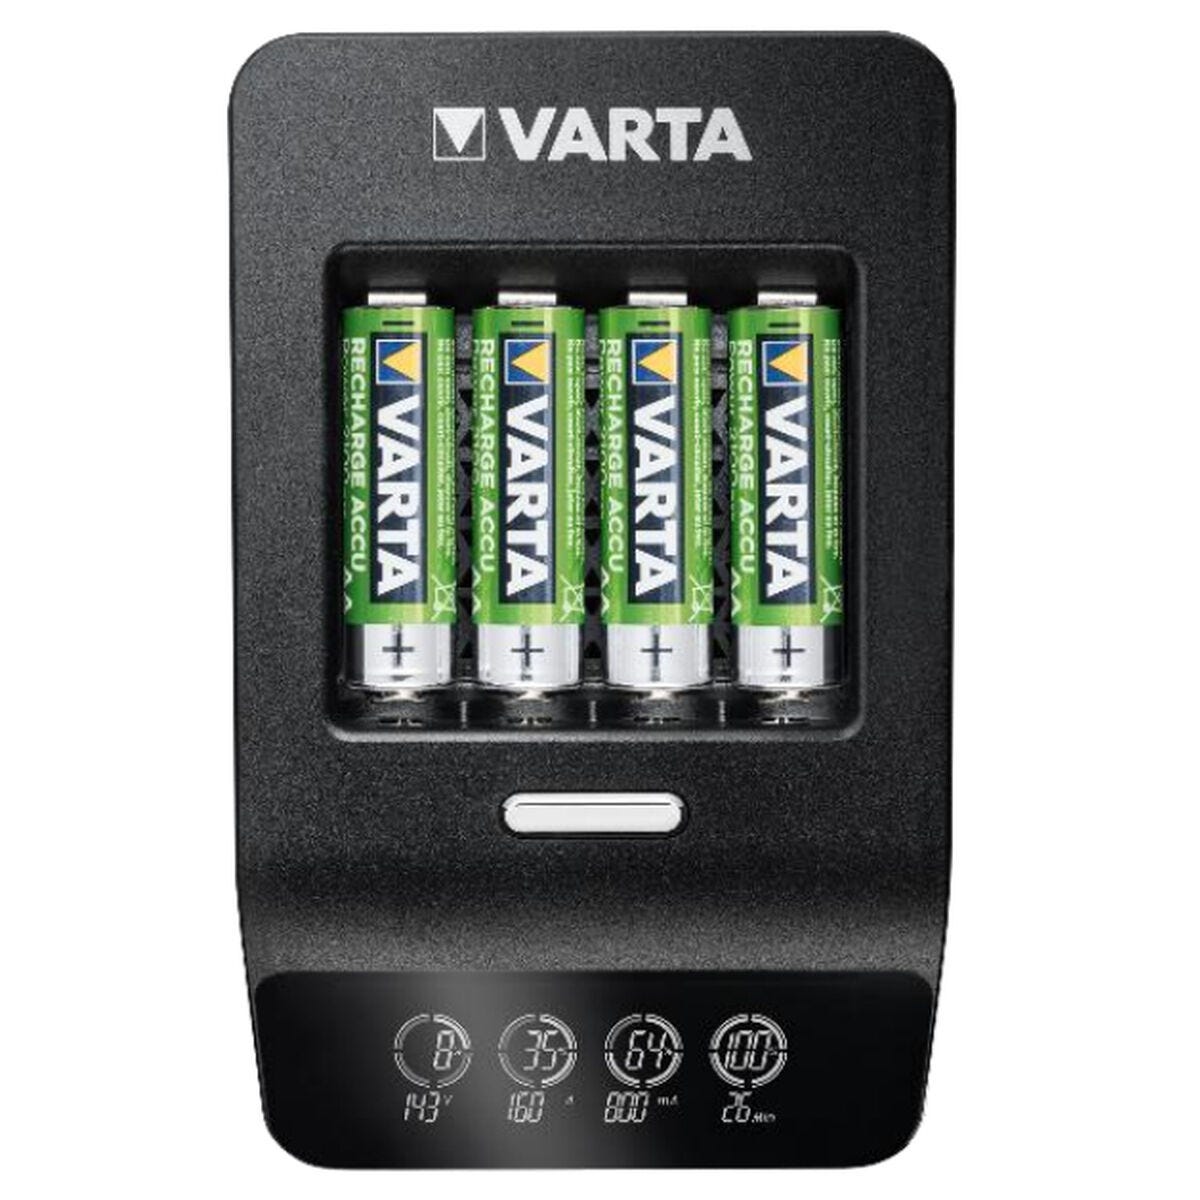 Varta LCD Ultra Fast Ch.+ 4x 56706 Chargeur de piles rondes NiMH LR03 (AAA), LR6 (AA) 3